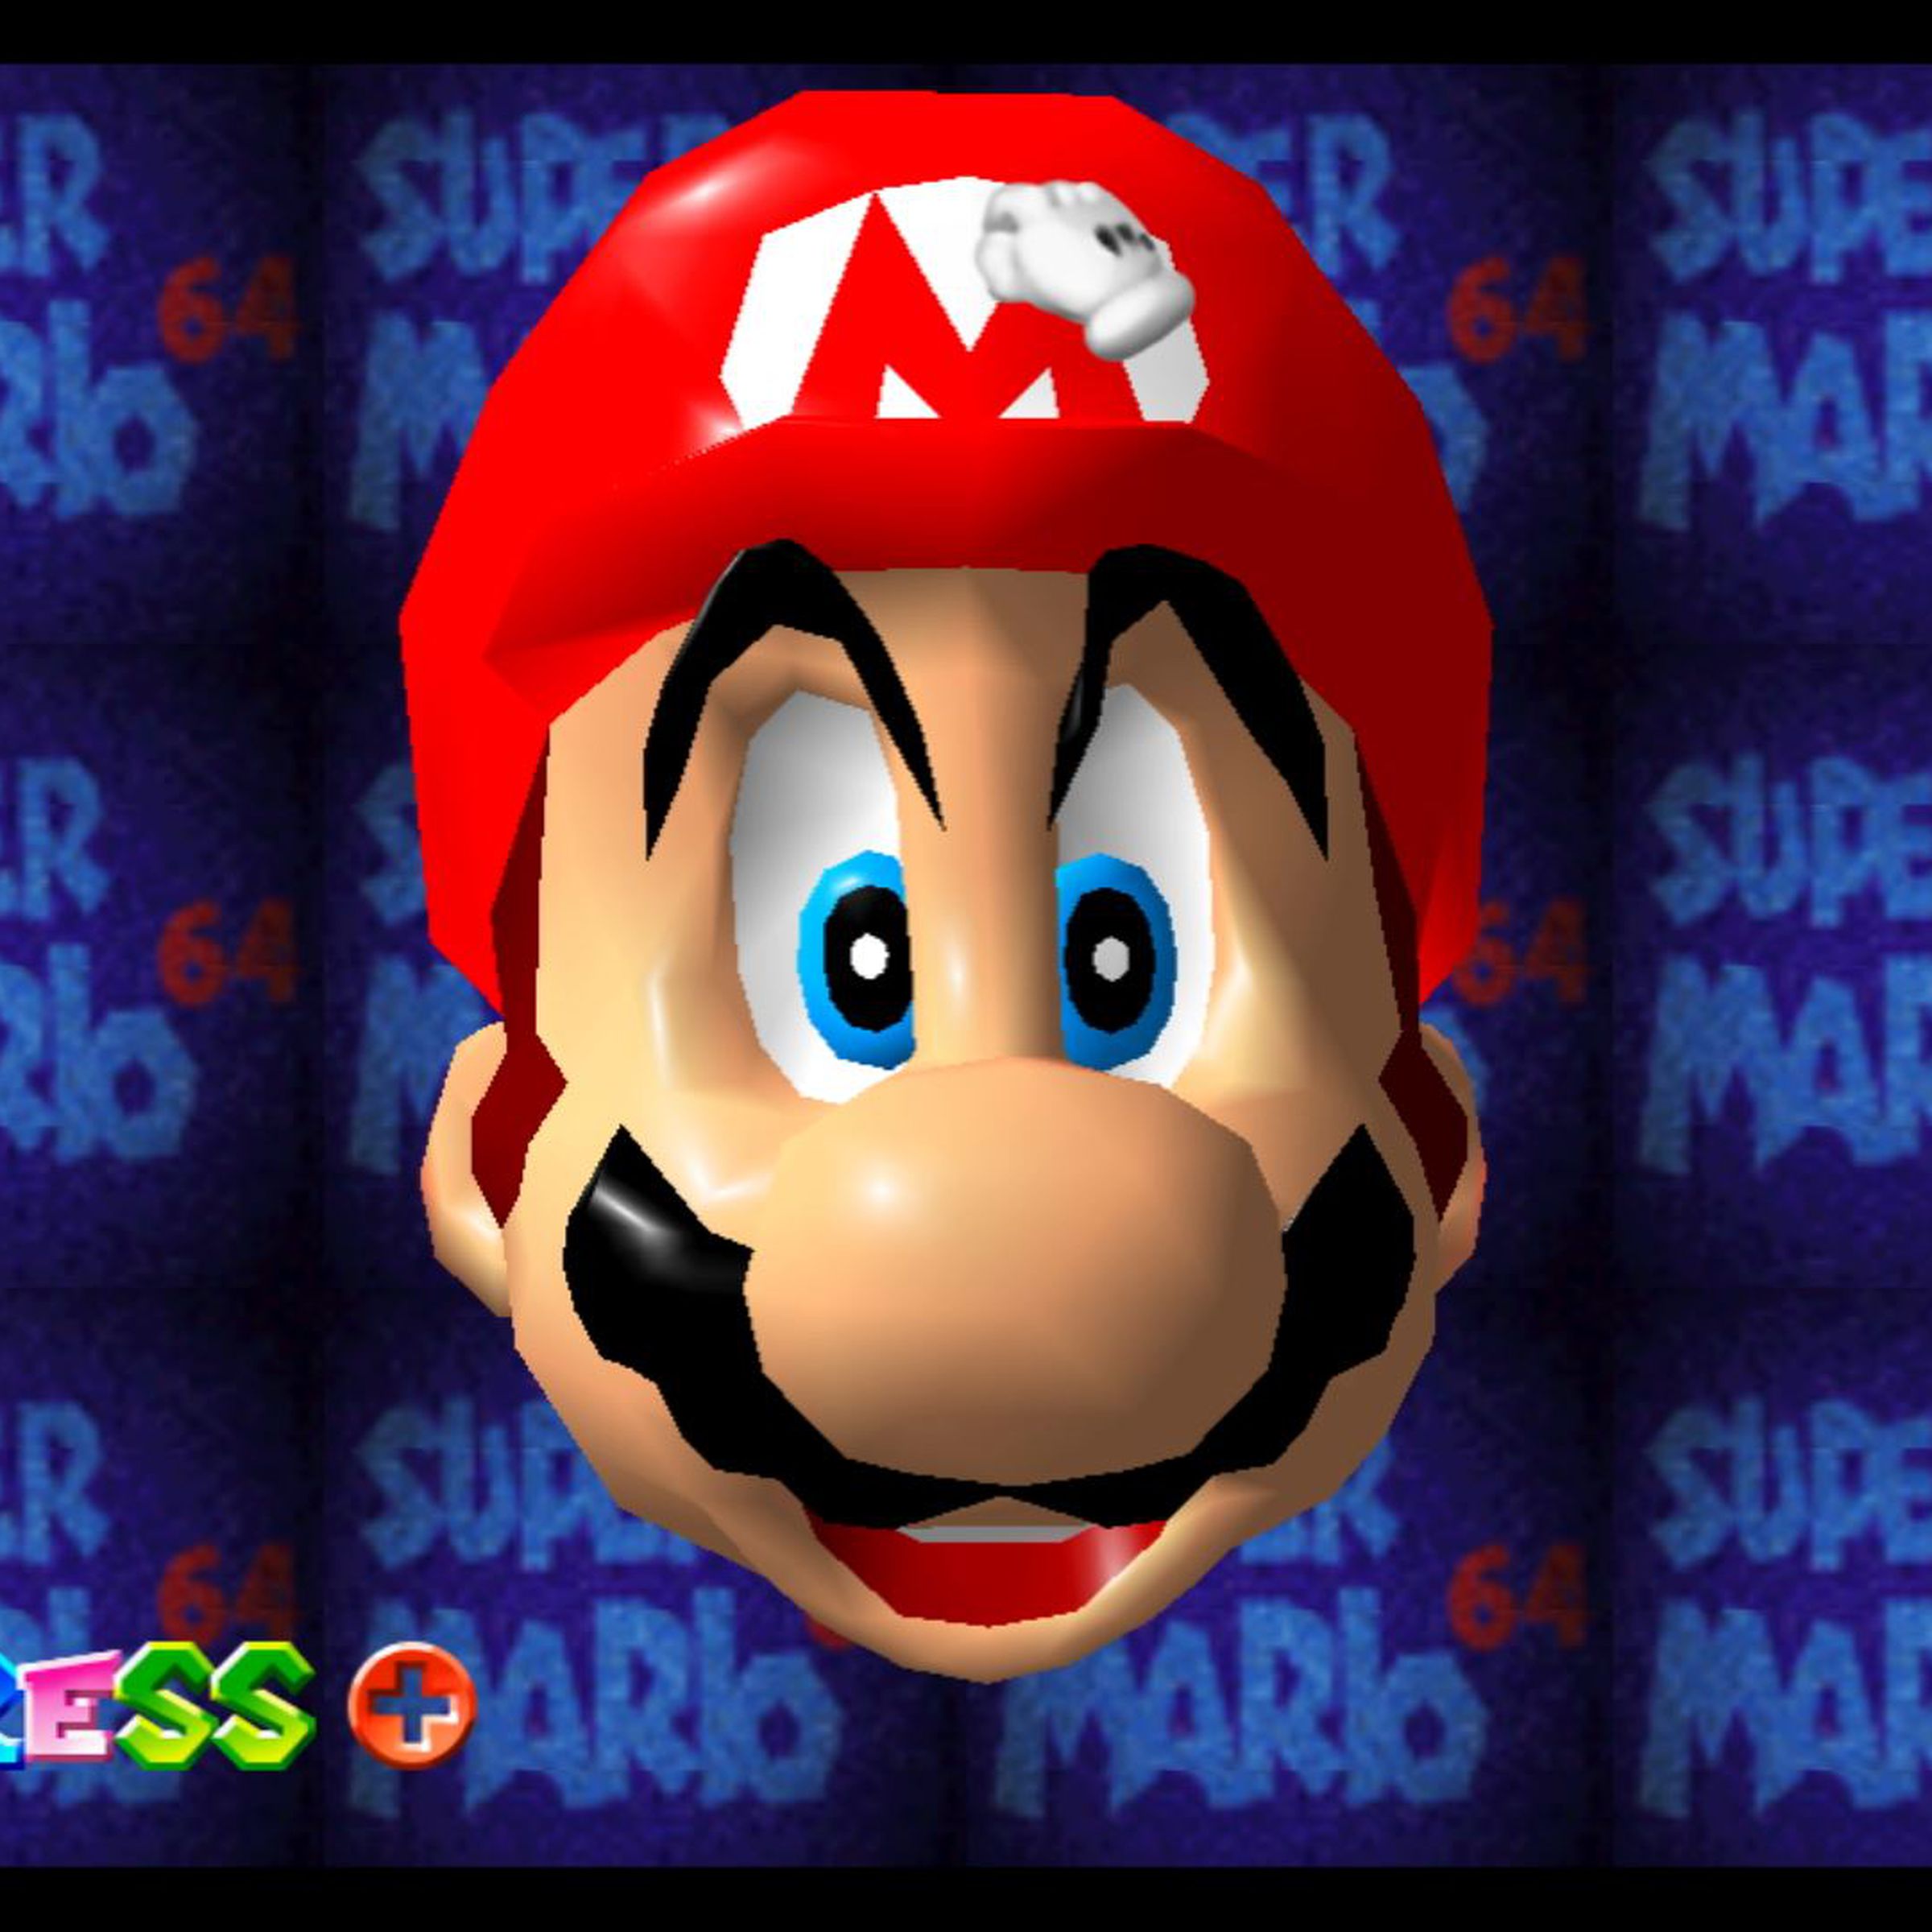 A screenshot from the video game Super Mario 64.